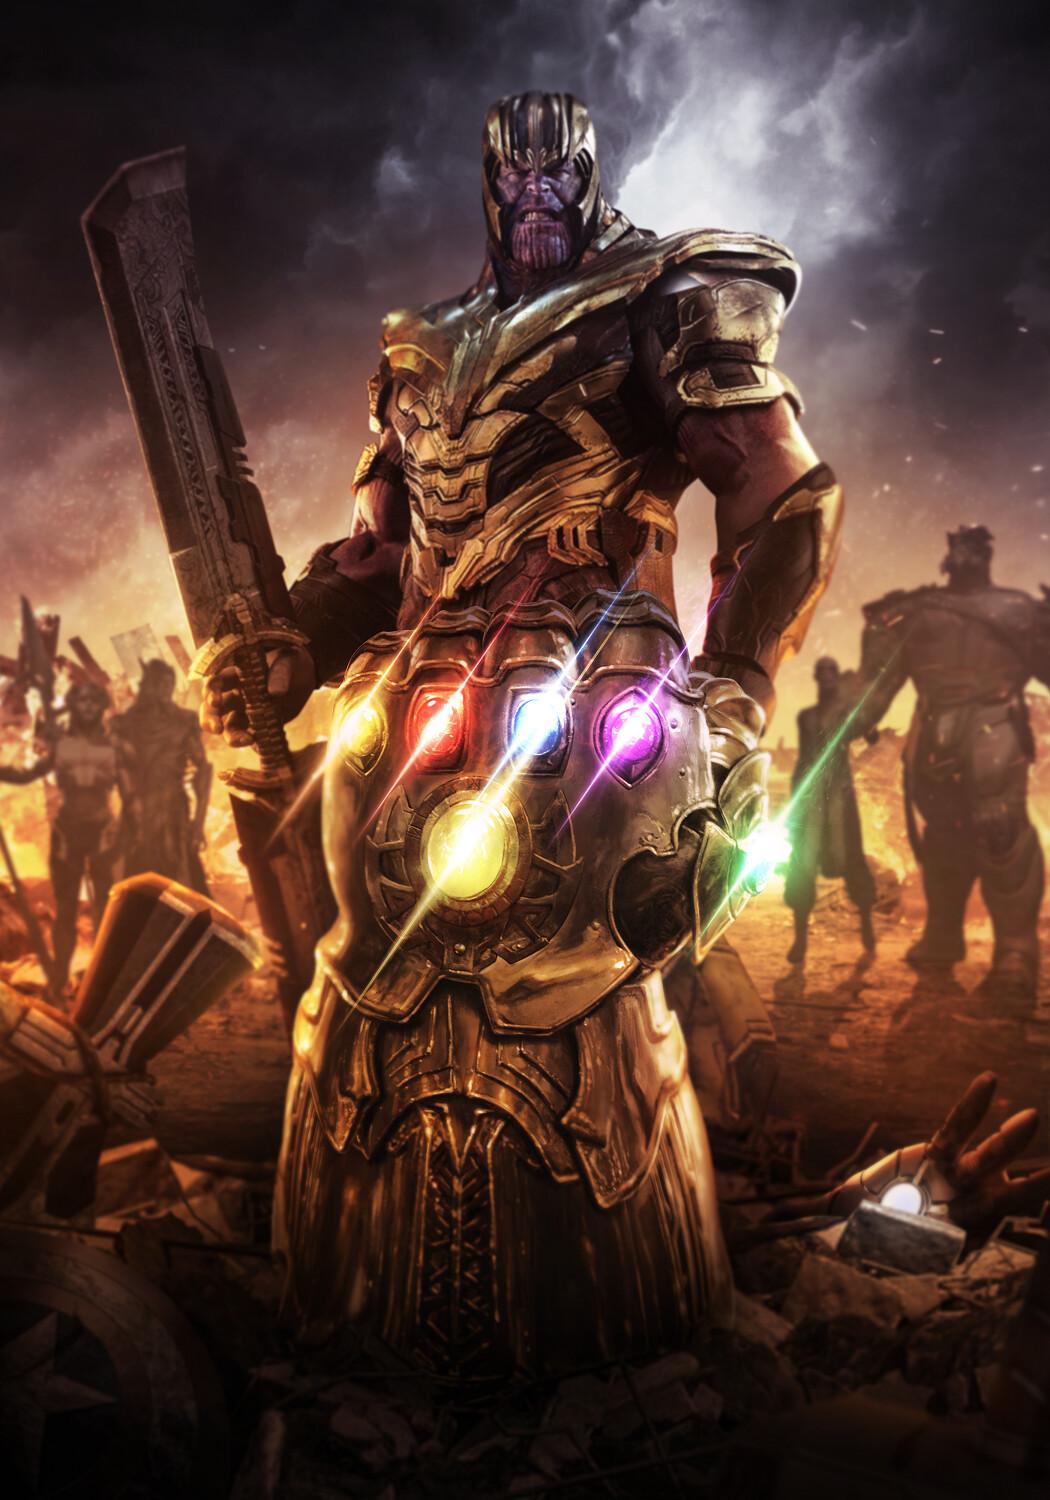 AVENGERS ENDGAME AND THE GAUNTLET